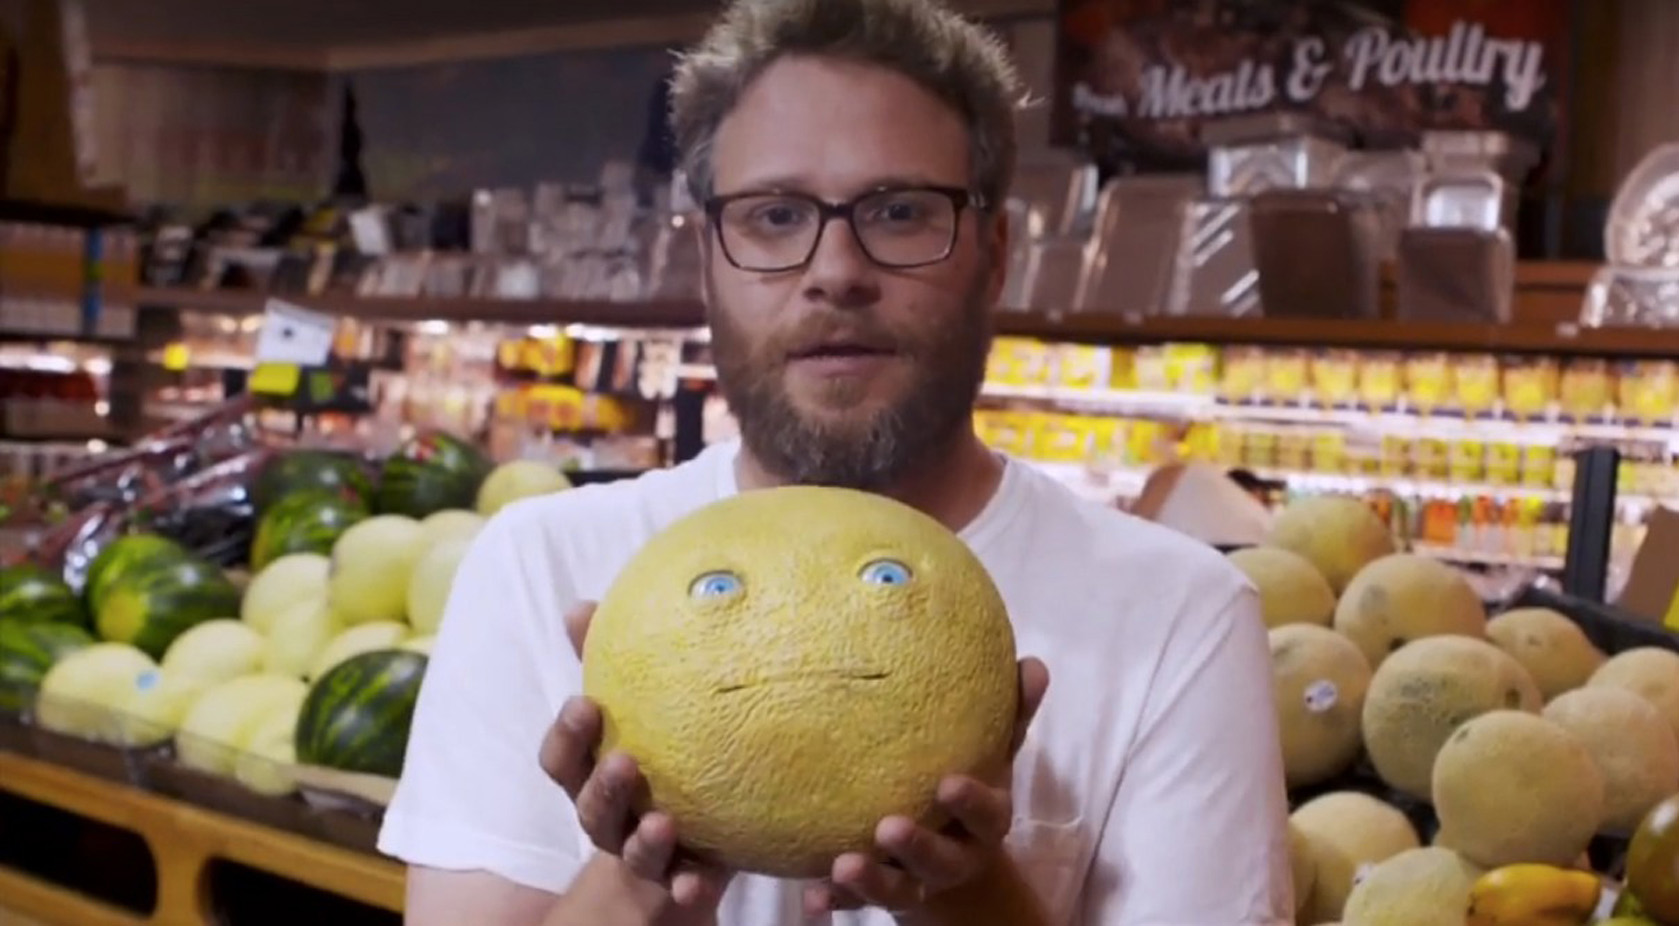 Seth Rogen pranks grocery shoppers for “Sausage Party” - Inquirer.net